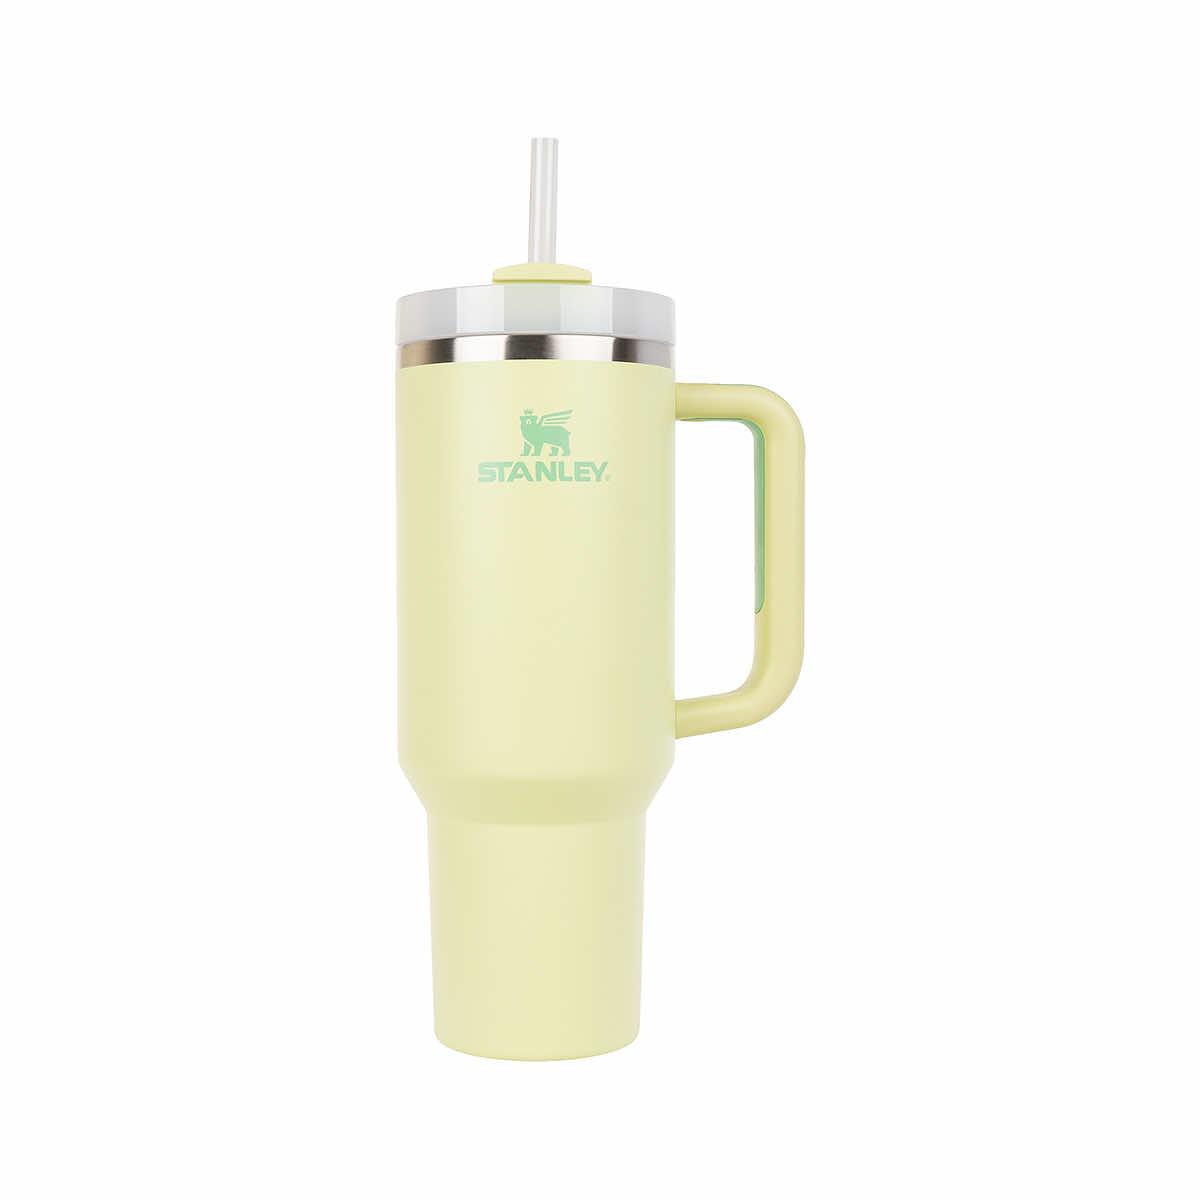 Stanley The Quencher 40 oz. H2.0 FlowState Tumbler in Cream